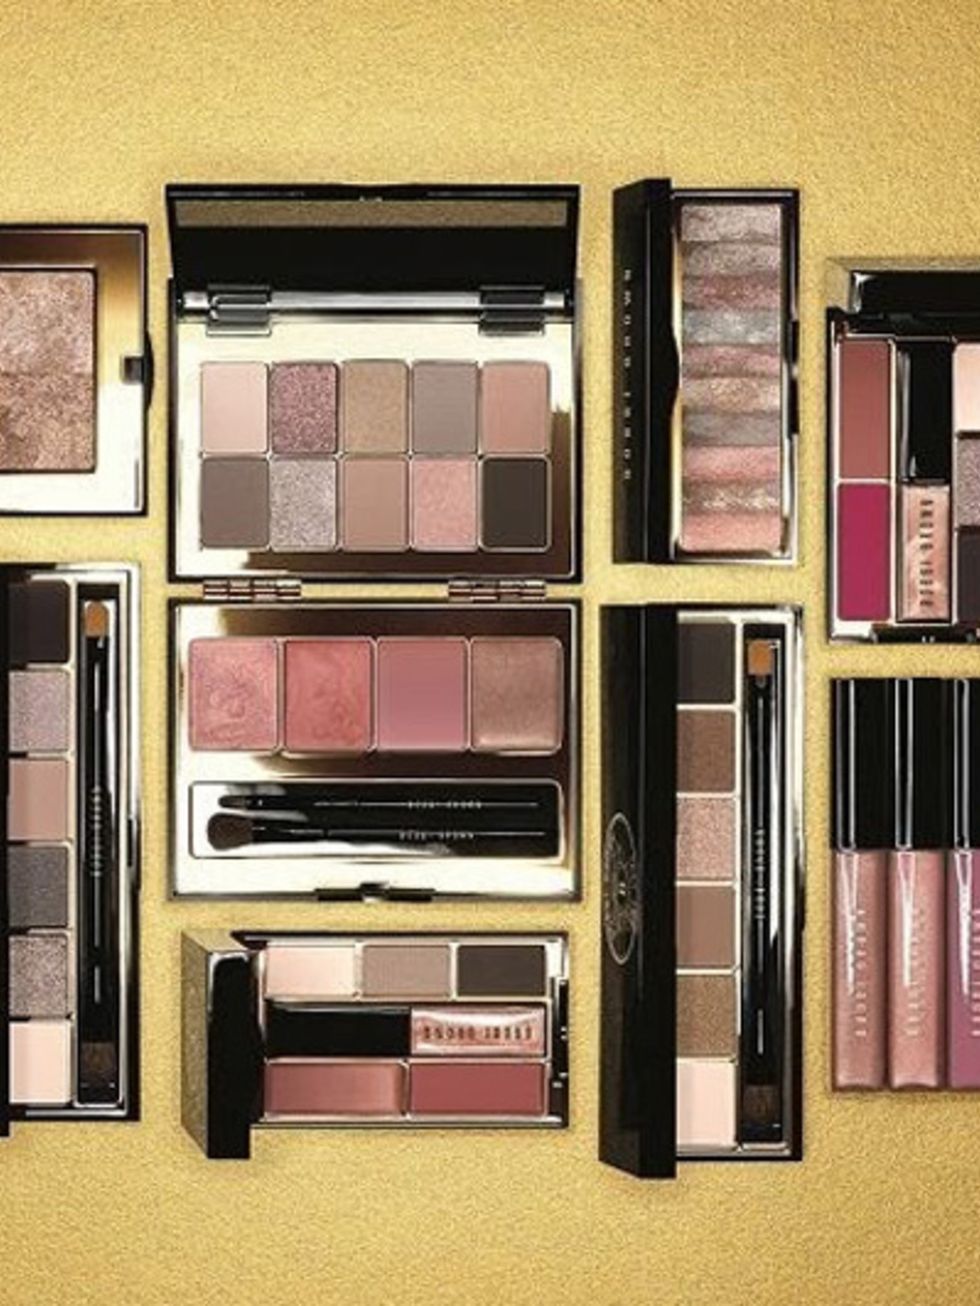 Pink, Tints and shades, Organ, Eye shadow, Magenta, Rectangle, Cosmetics, Paint, Peach, Collection, 